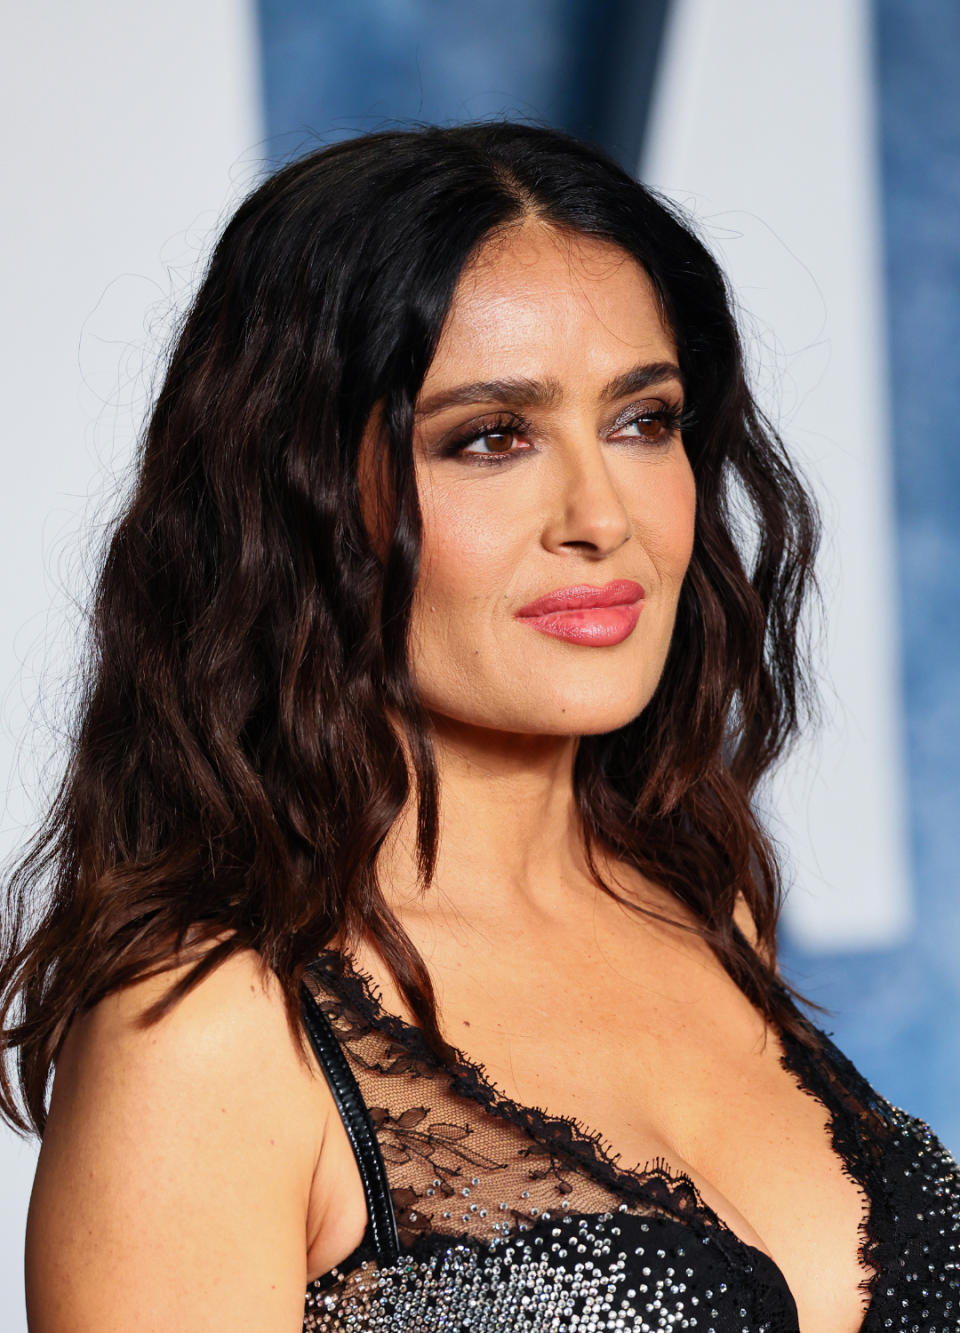 Salma Hayek attends the 2023 Vanity Fair Oscar Party Hosted By Radhika Jones at Wallis Annenberg Center for the Performing Arts on March 12, 2023 in Beverly Hills, California